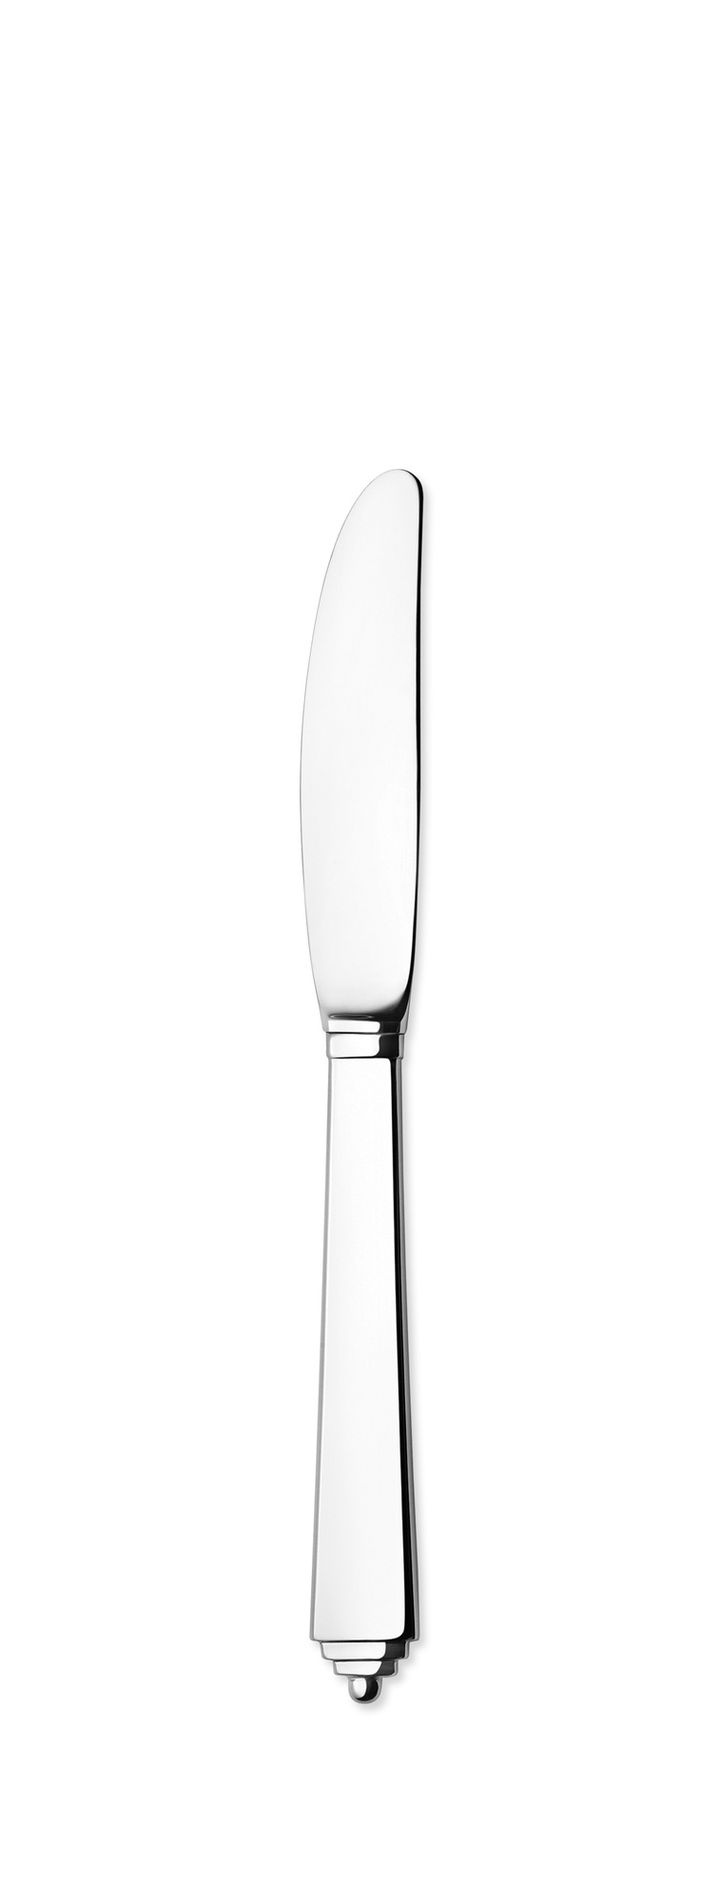 Pyramid table knife - Stainless steel - Georg Jensen